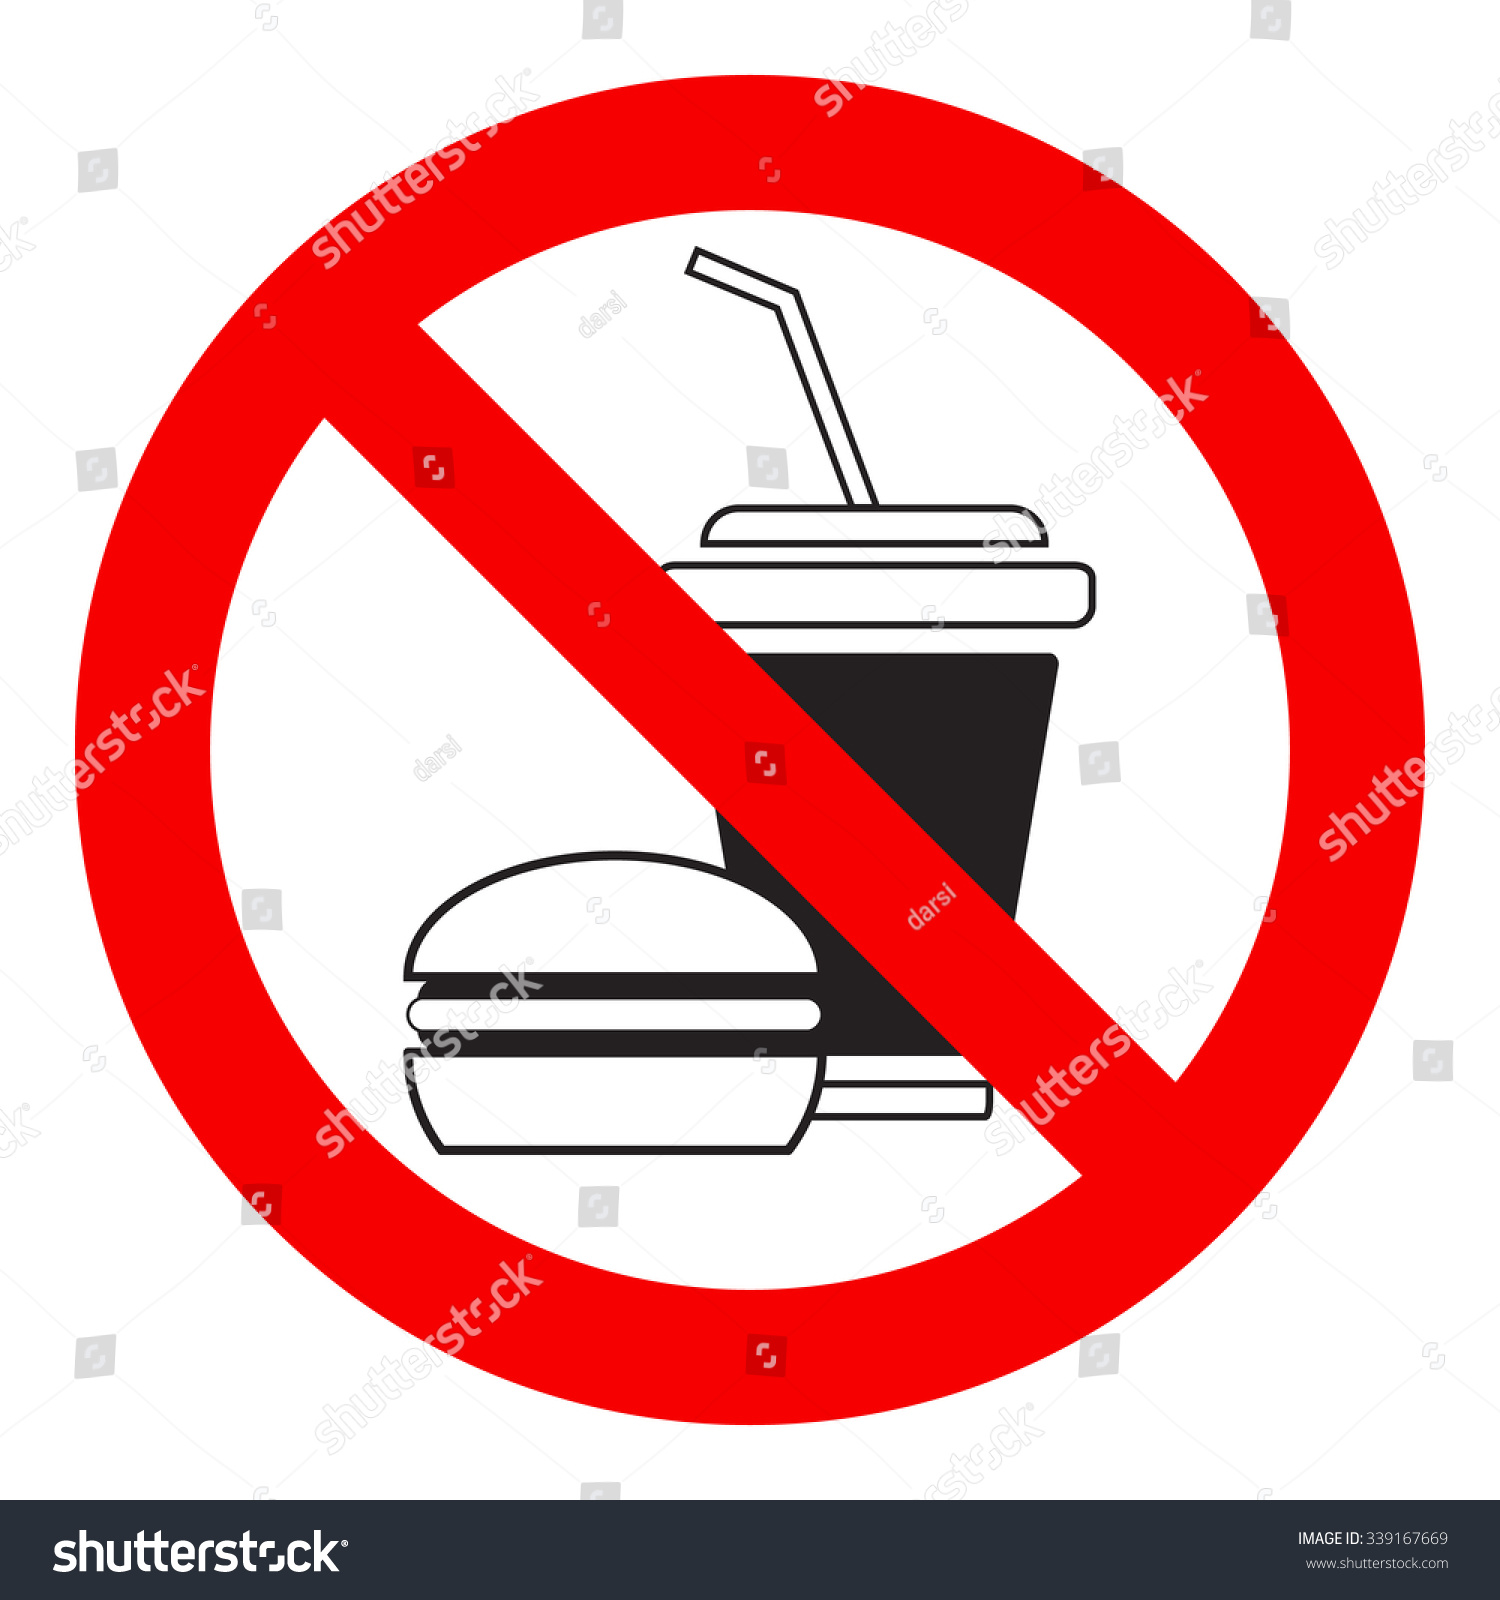 No Food Allowed Symbol Isolated On Stock Vector 339167669 - Shutterstock